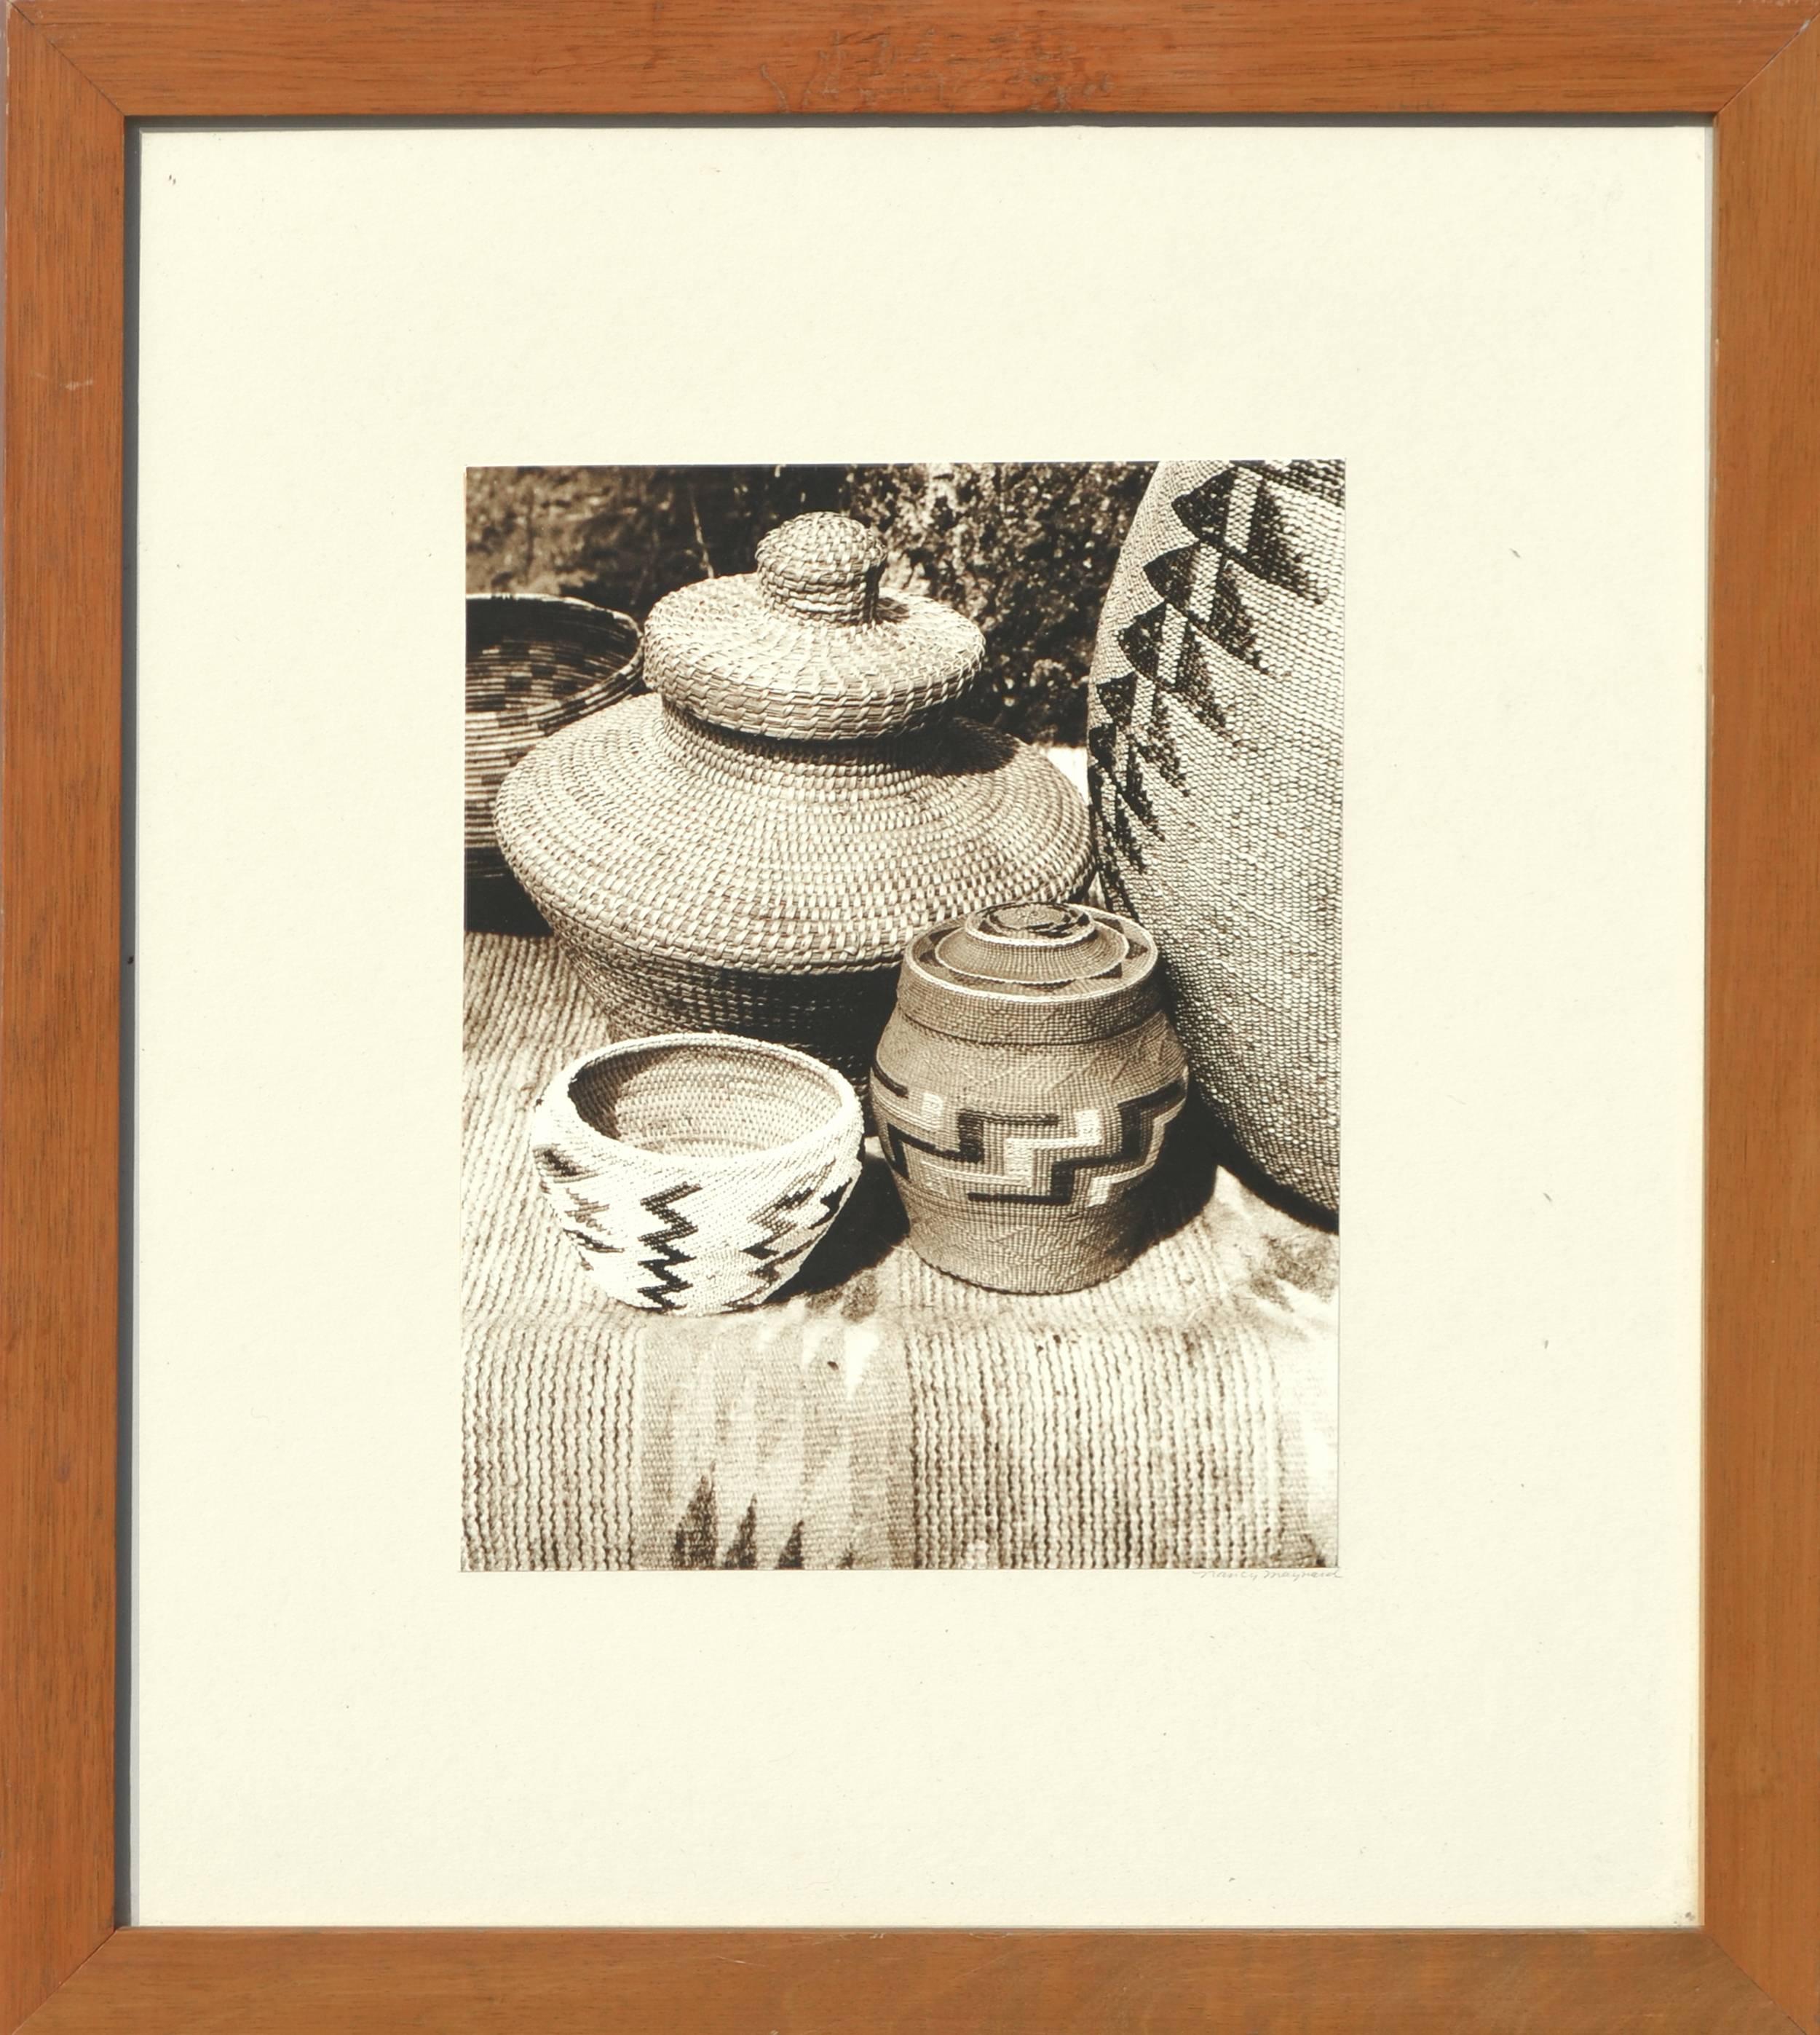 Indian Baskets - Set of 3 photographs - Beige Black and White Photograph by Nancy Maynard